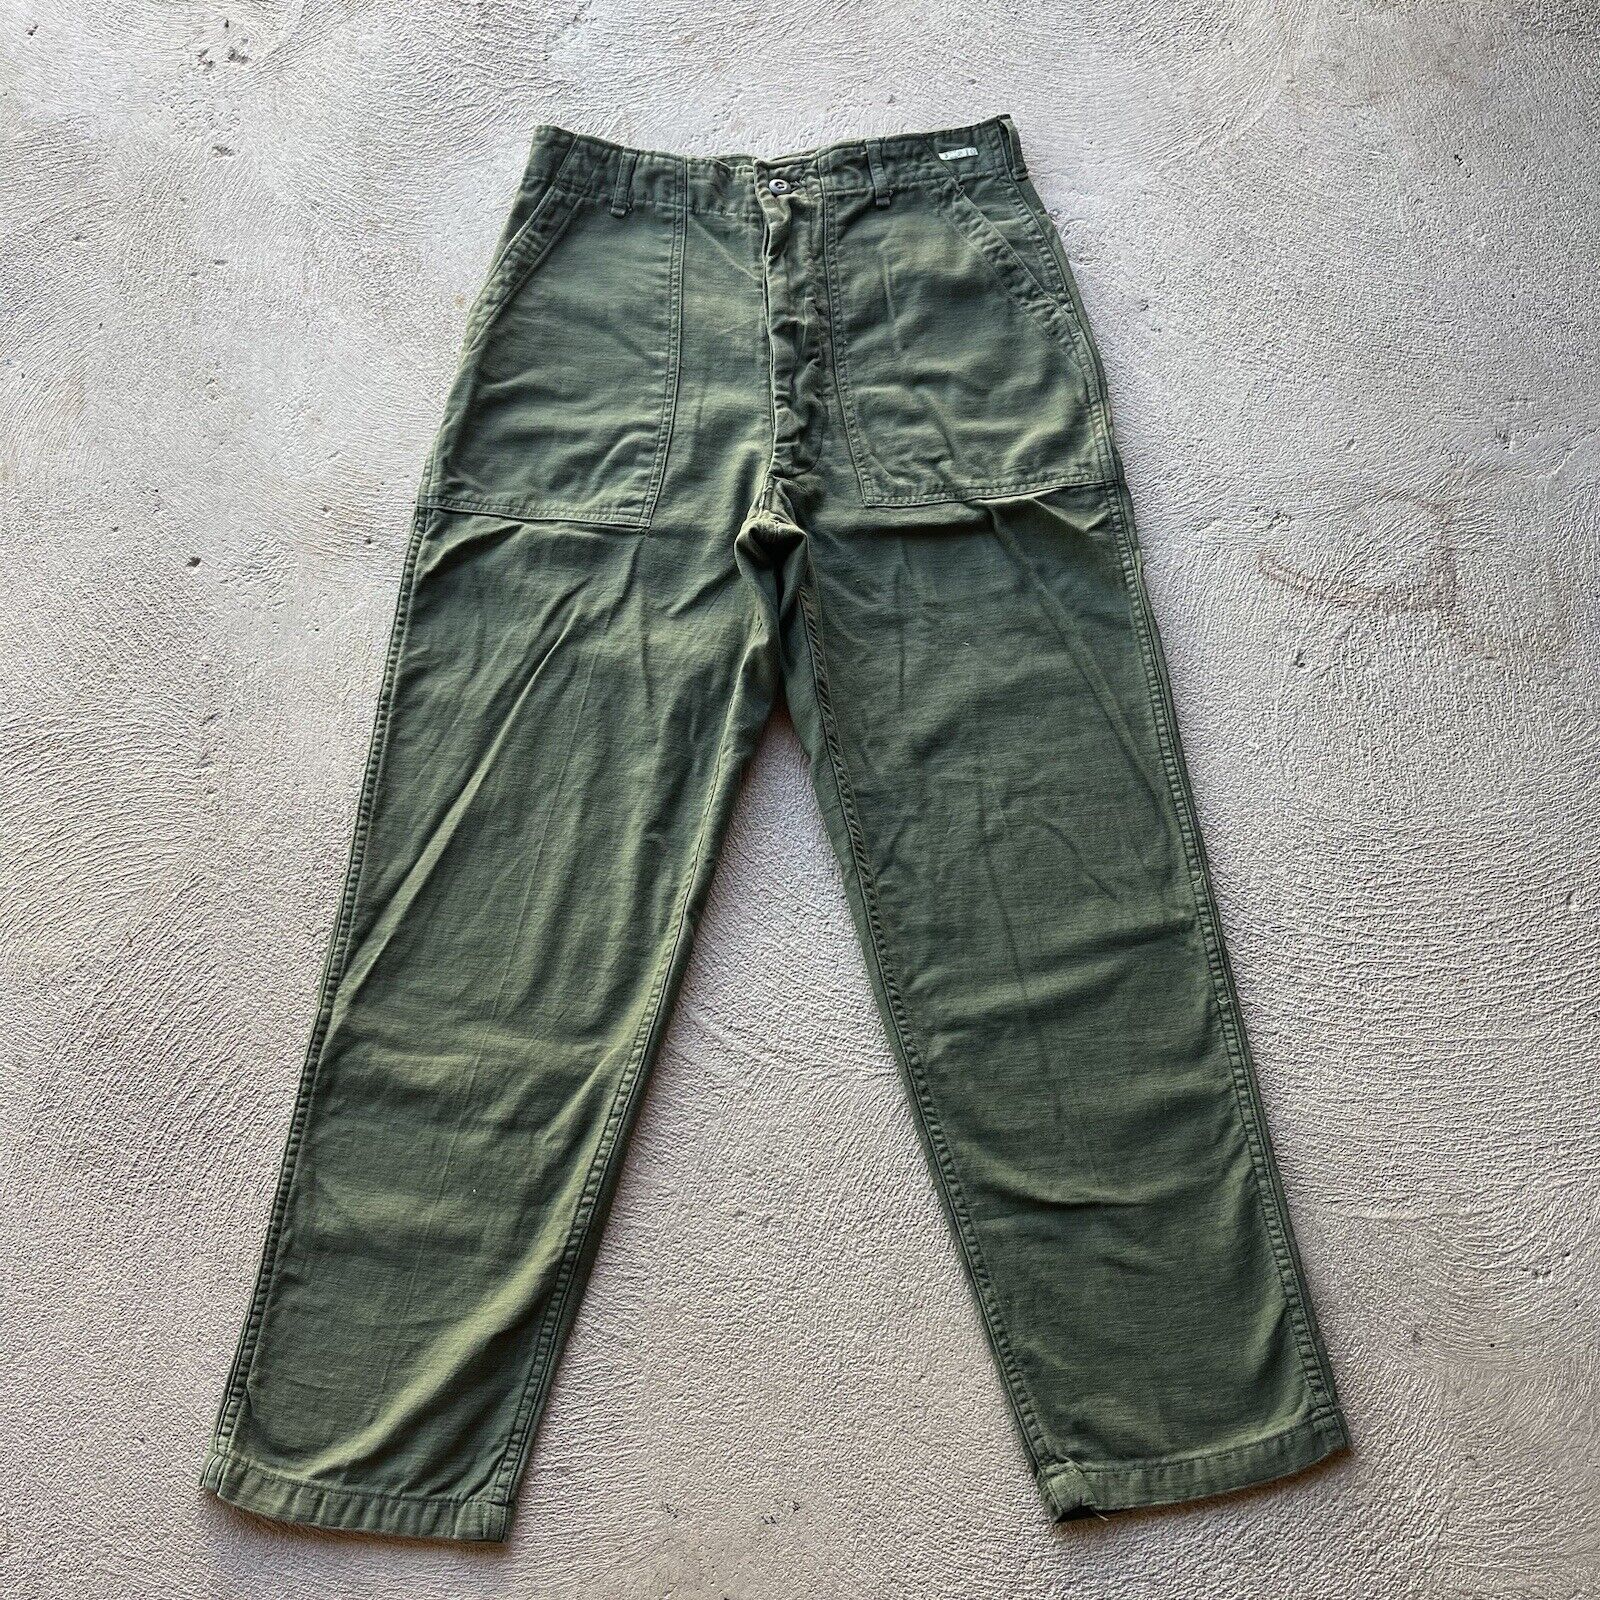 Vintage Military Pants 32x30 Green OG 107 Trousers Utility US Army Sateen